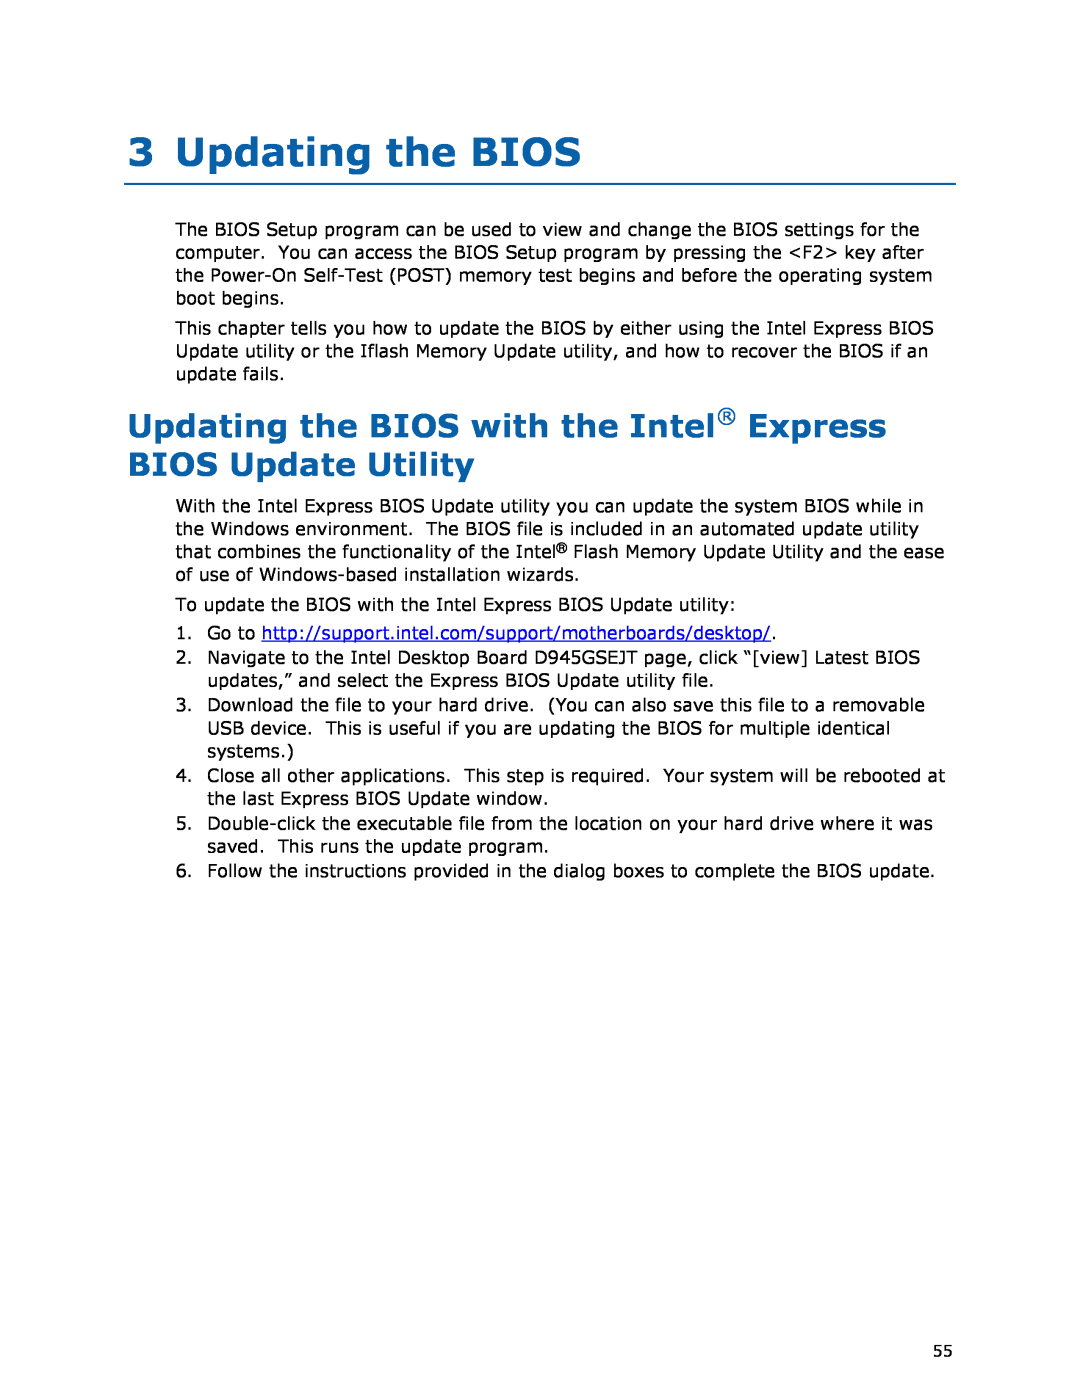 Intel D945GSEJT manual Updating the BIOS with the Intel Express, BIOS Update Utility 